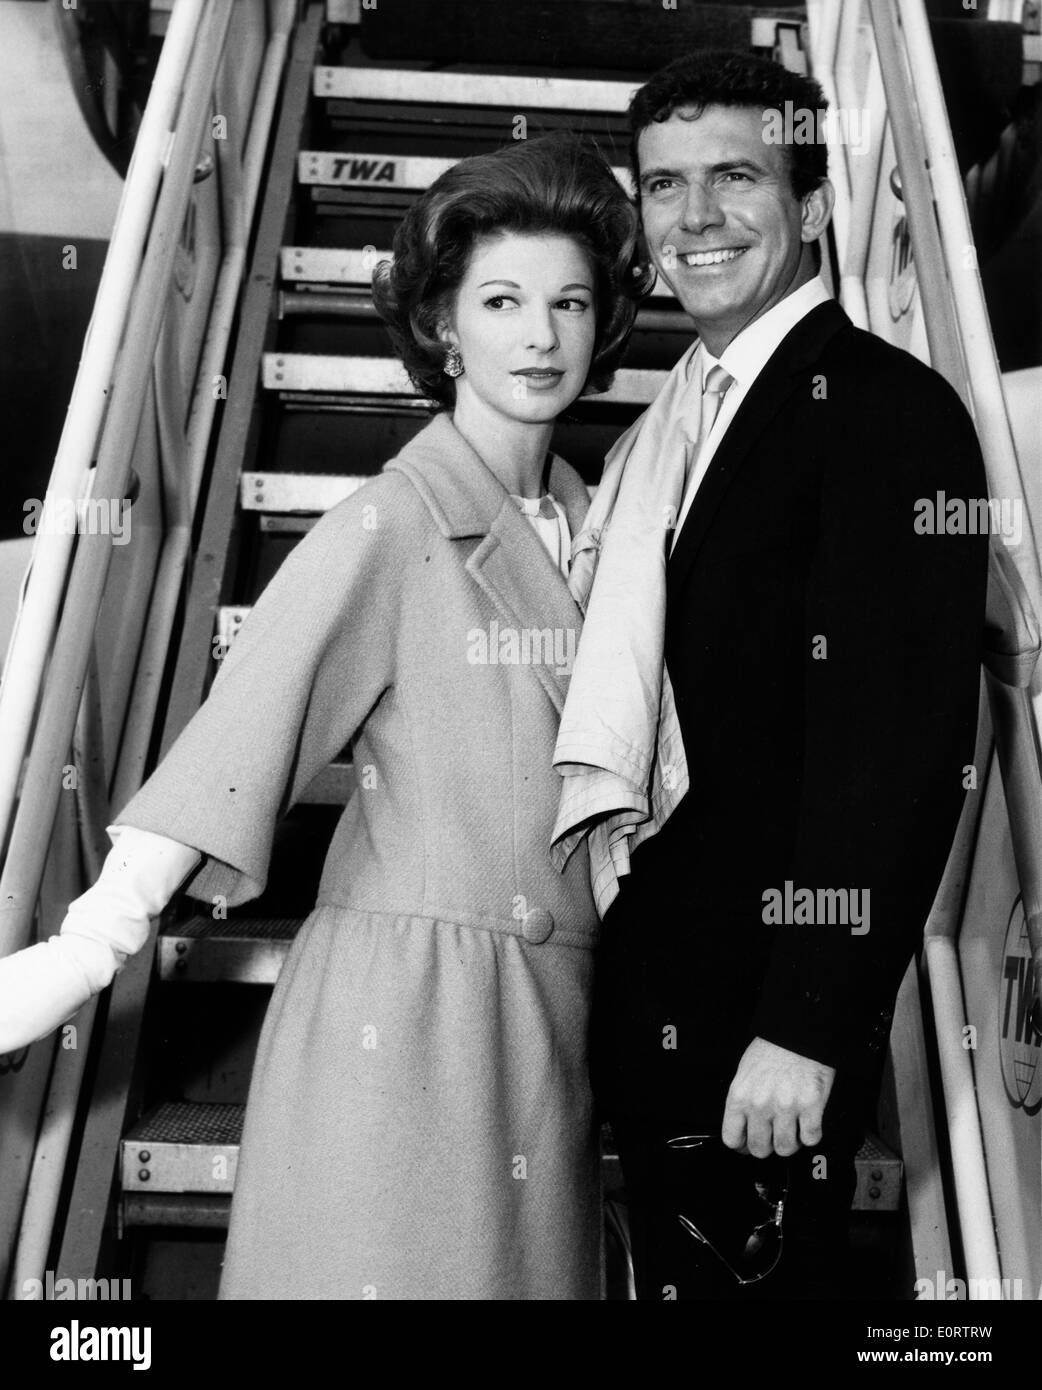 Actor Tony Franciosa boarding an airplane with a woman Stock Photo